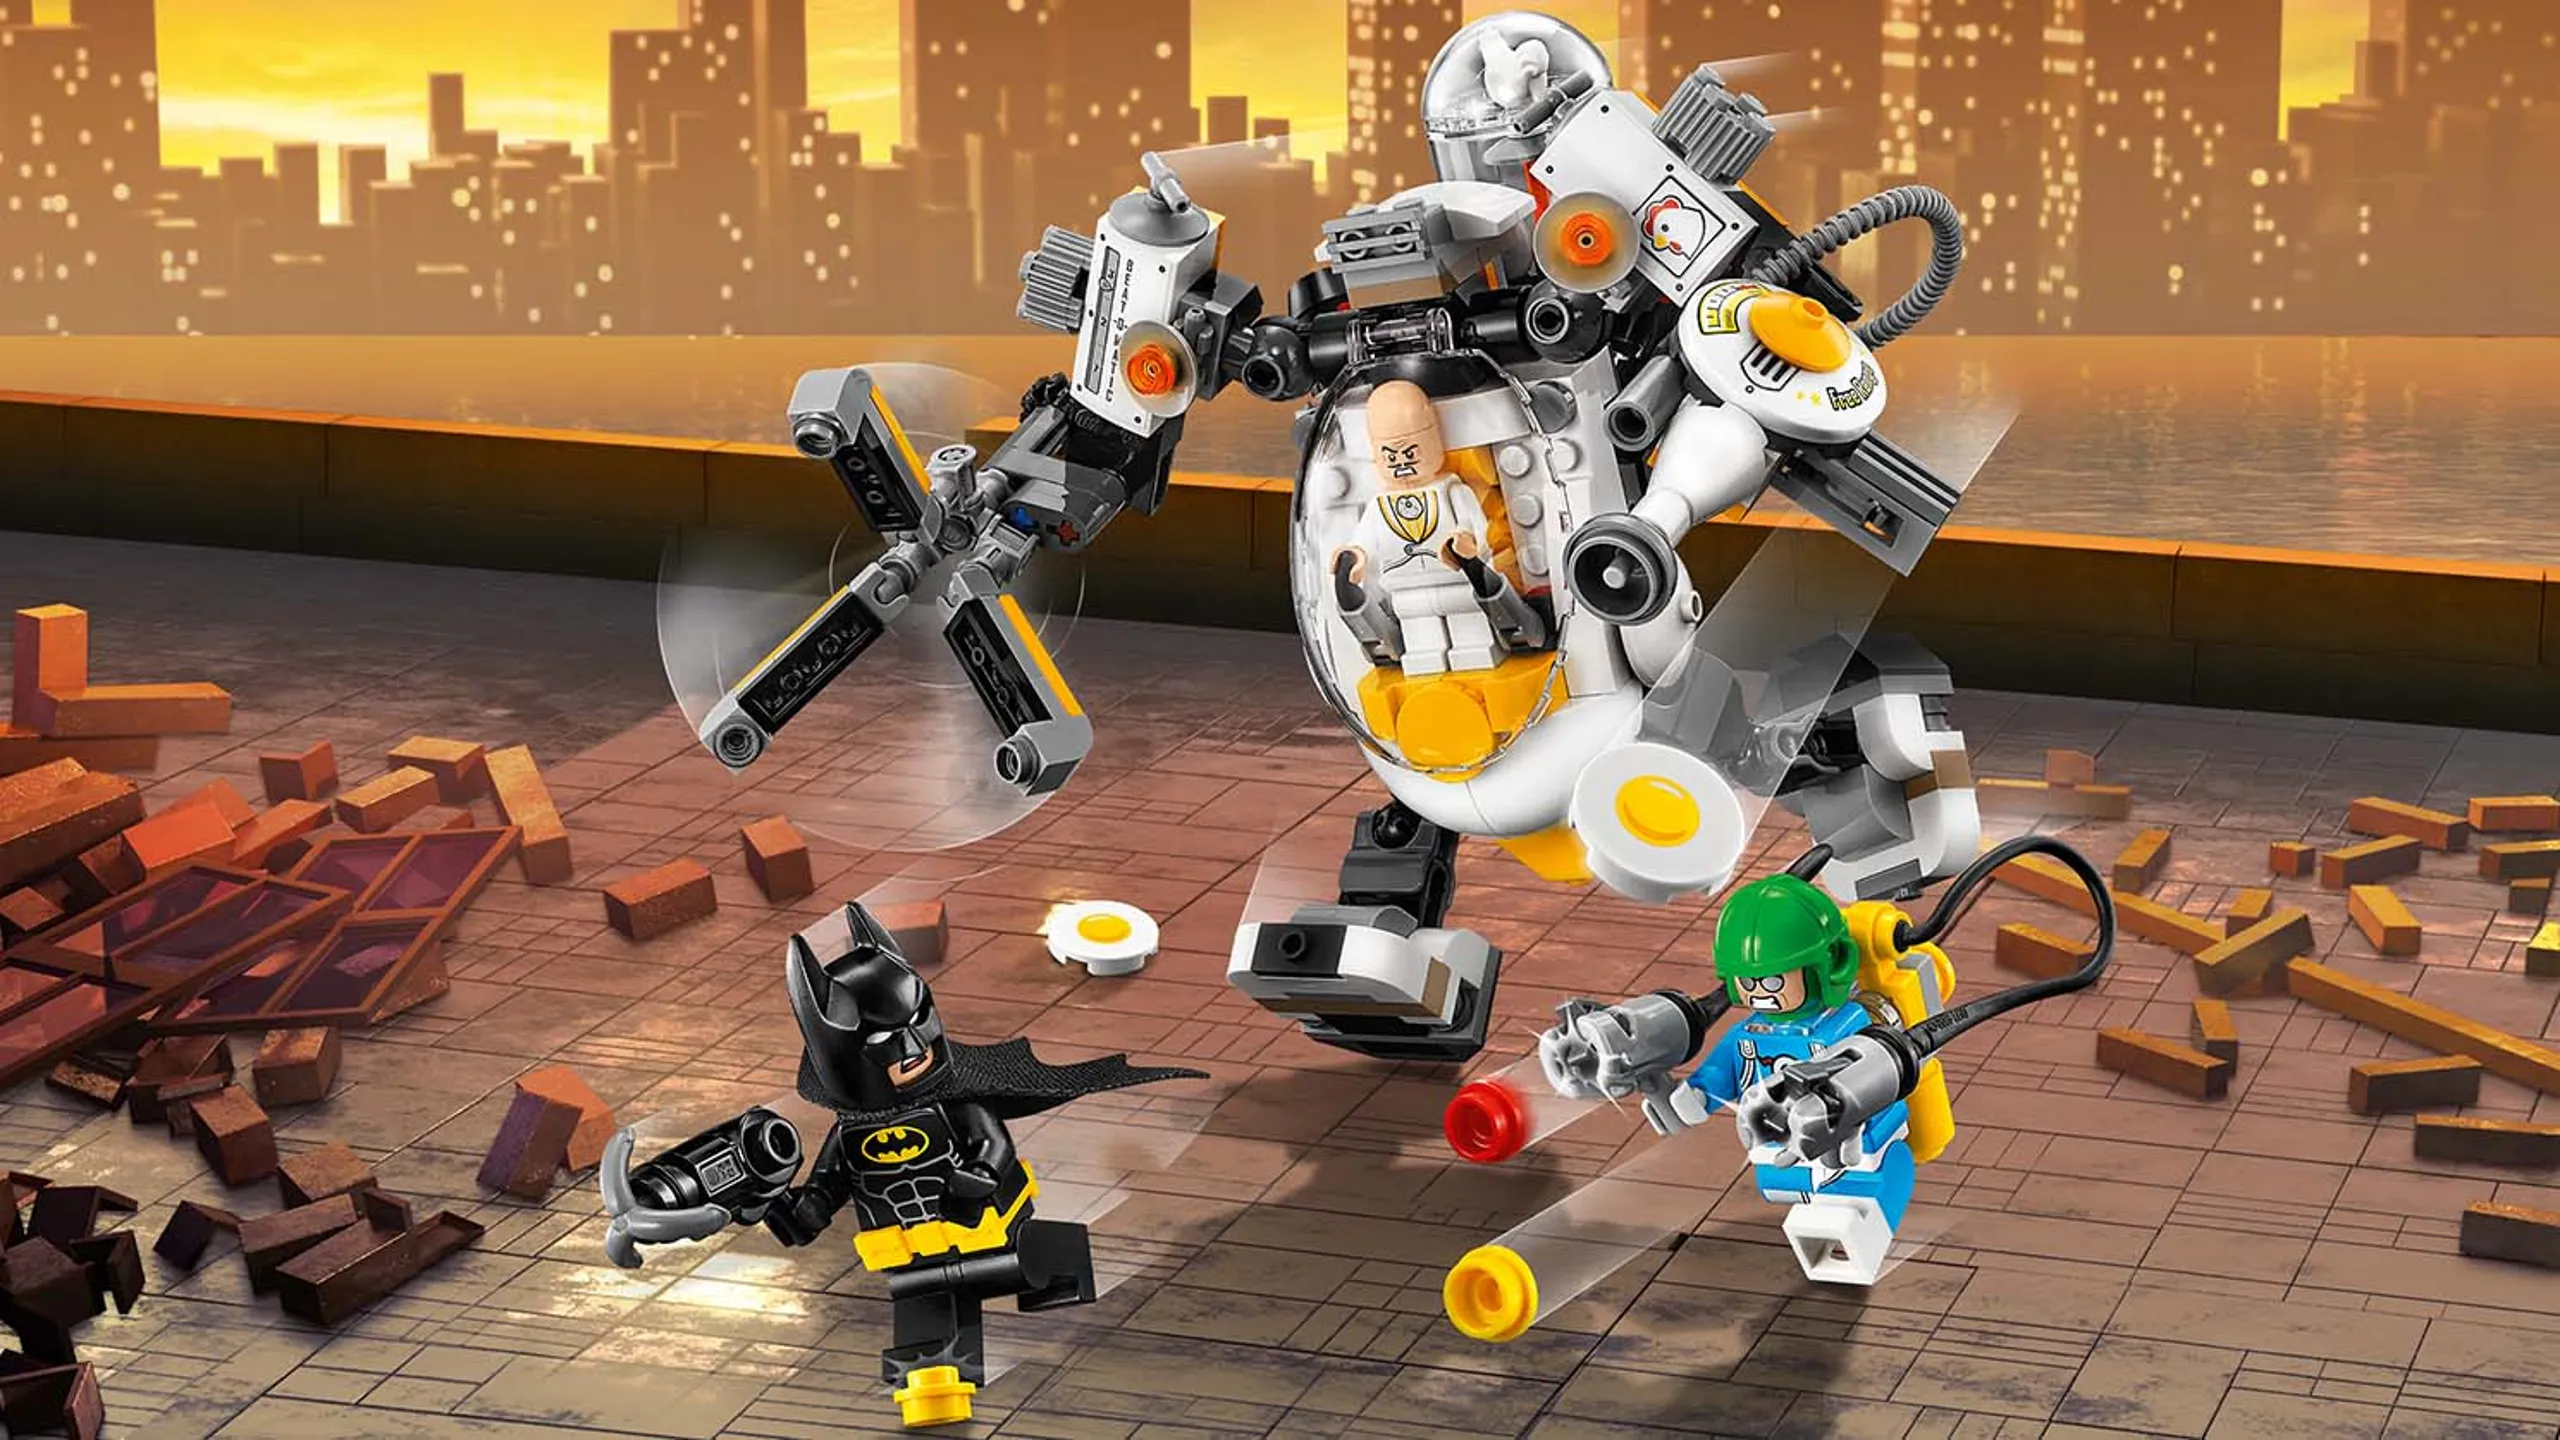 LEGO Batman Movie Egghead Mech Foodfight - 70920 - Batman gets in trouble when Egghead and Condiment King fights him in a foodfight